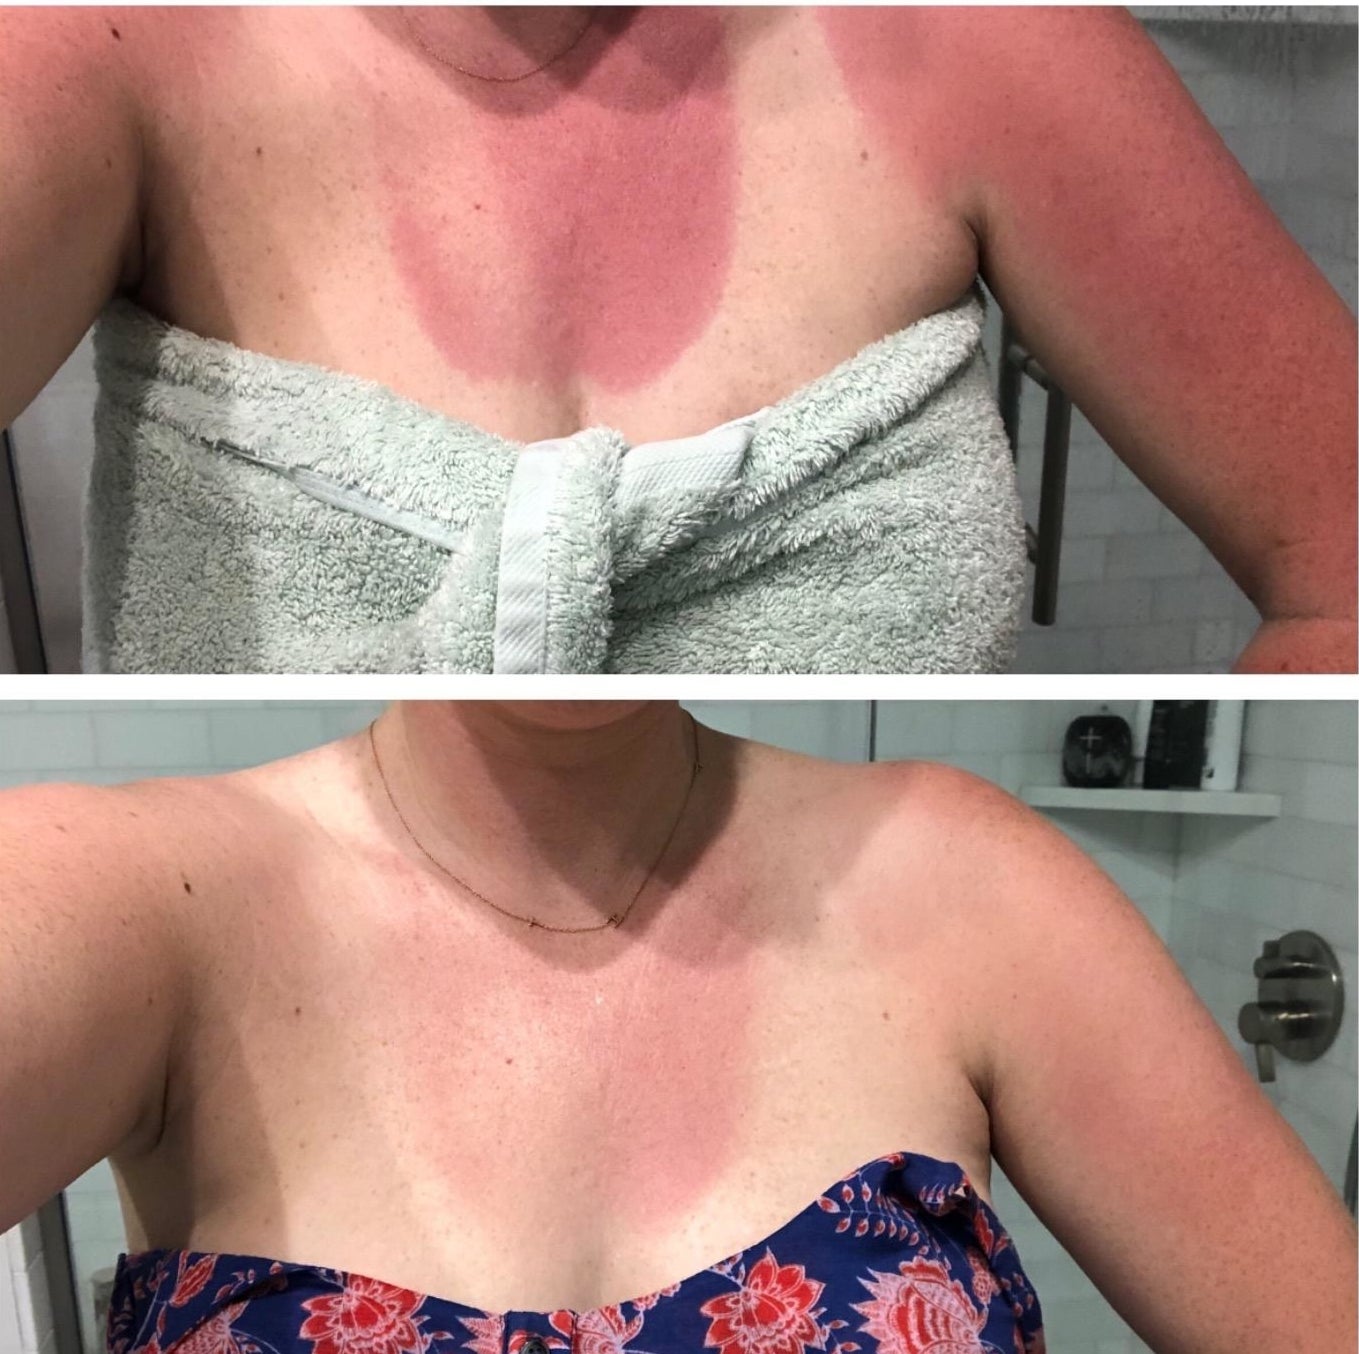 A reviewer with a giant sunburn oval on their chest prior to using product, the second photo is the same sunburnt oval but the color has faded a lot